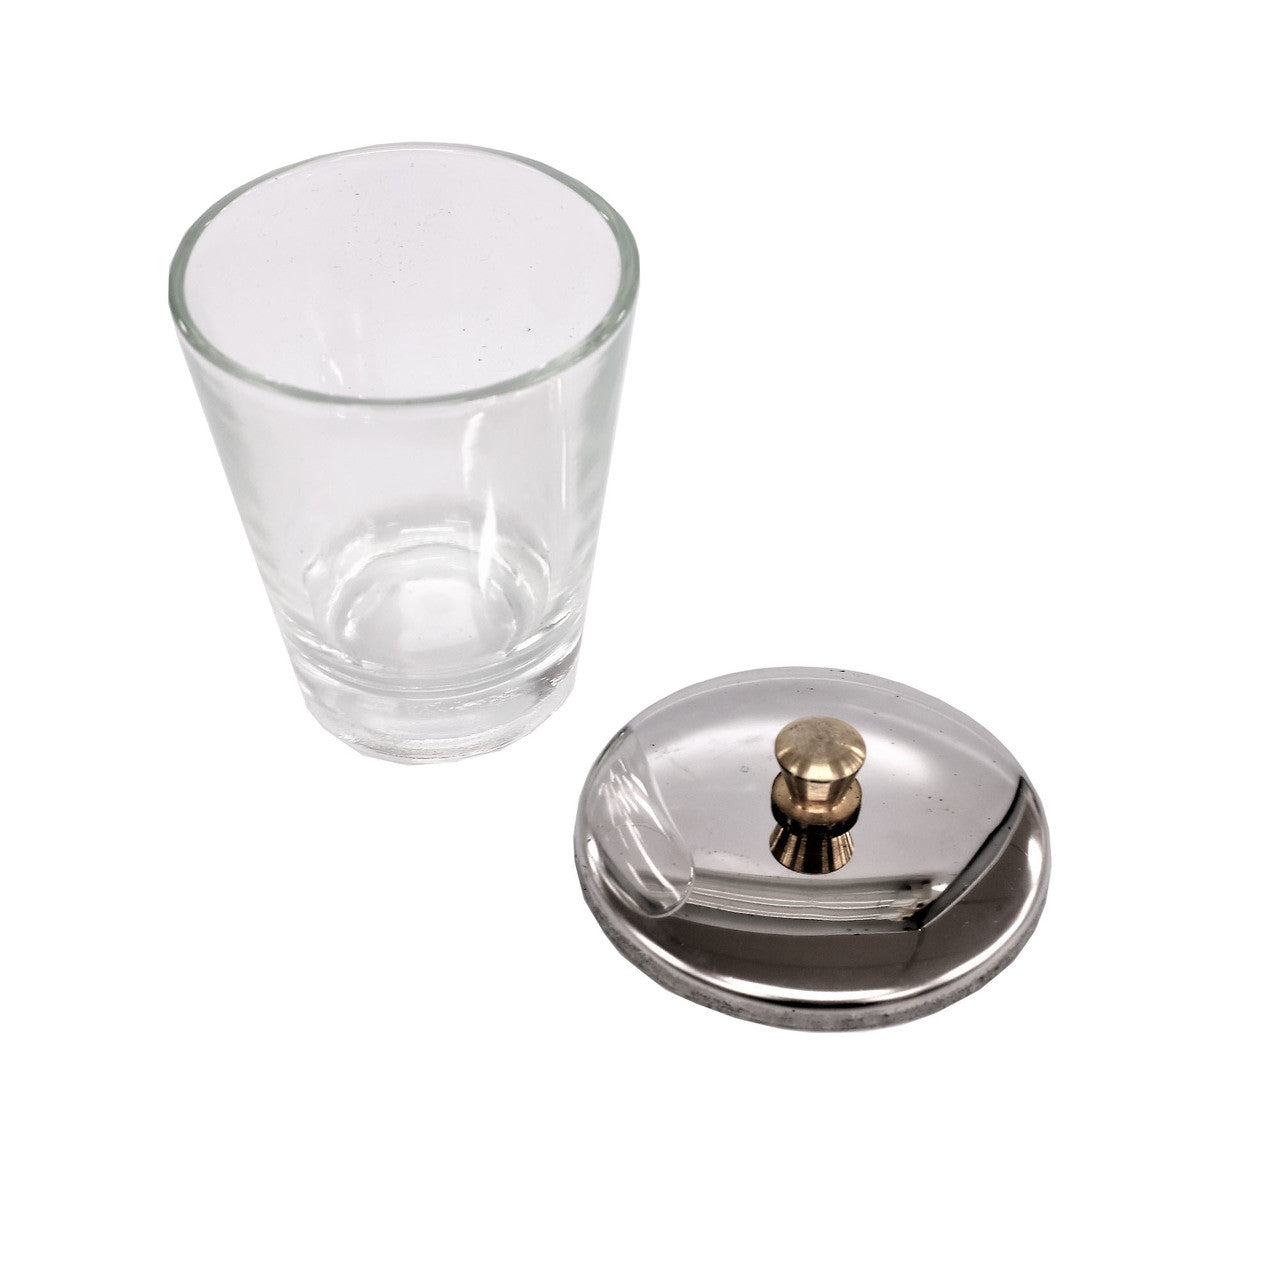 Glass Dappen Dish Round With Lid Diamond Nail Supplies